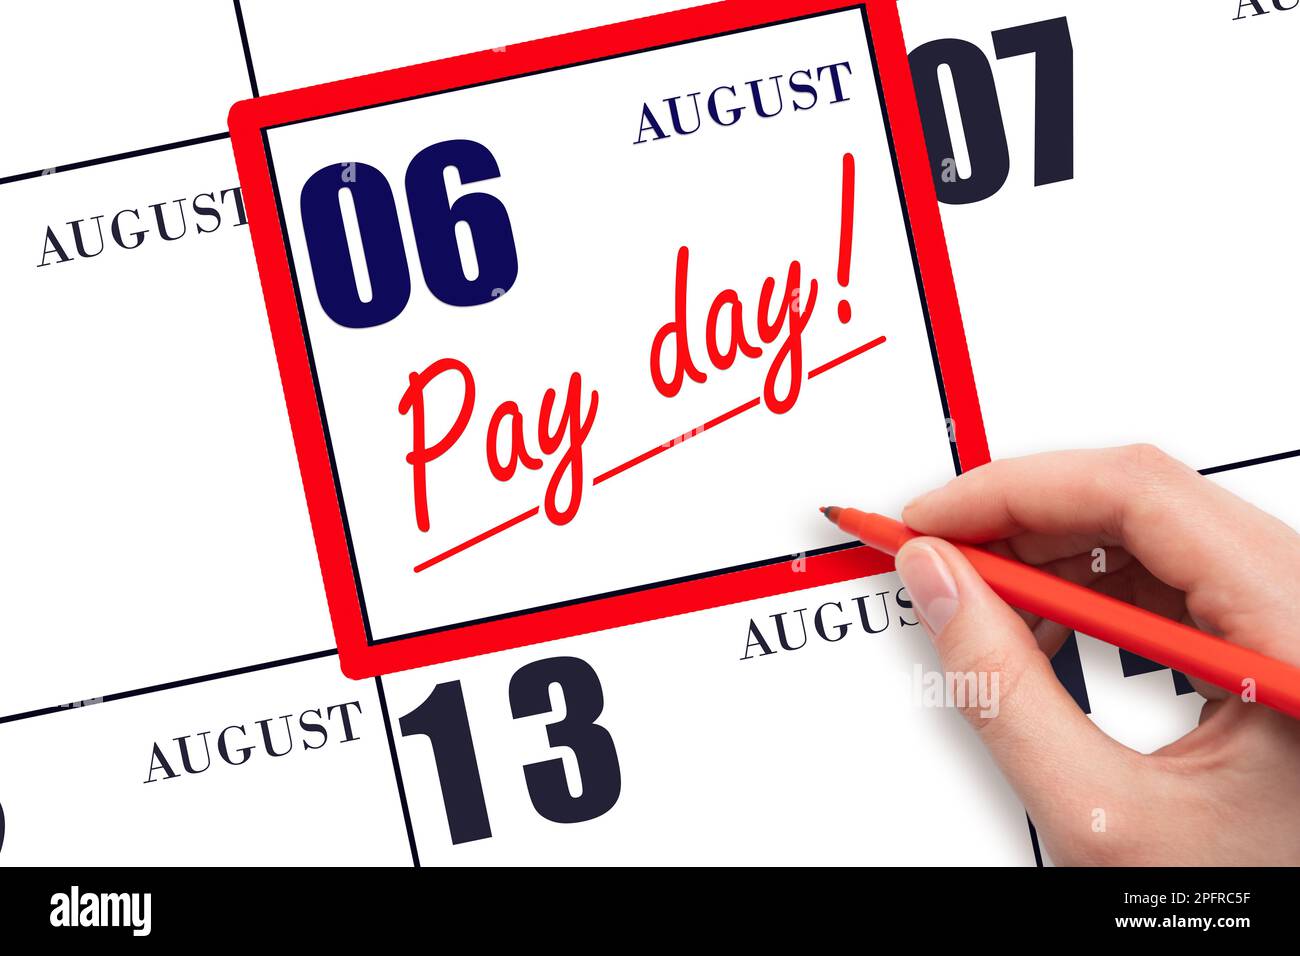 6th day of August. Hand writing text PAY DATE on calendar date August 6 and underline it. Payment due date.  Reminder concept of payment. Summer month Stock Photo